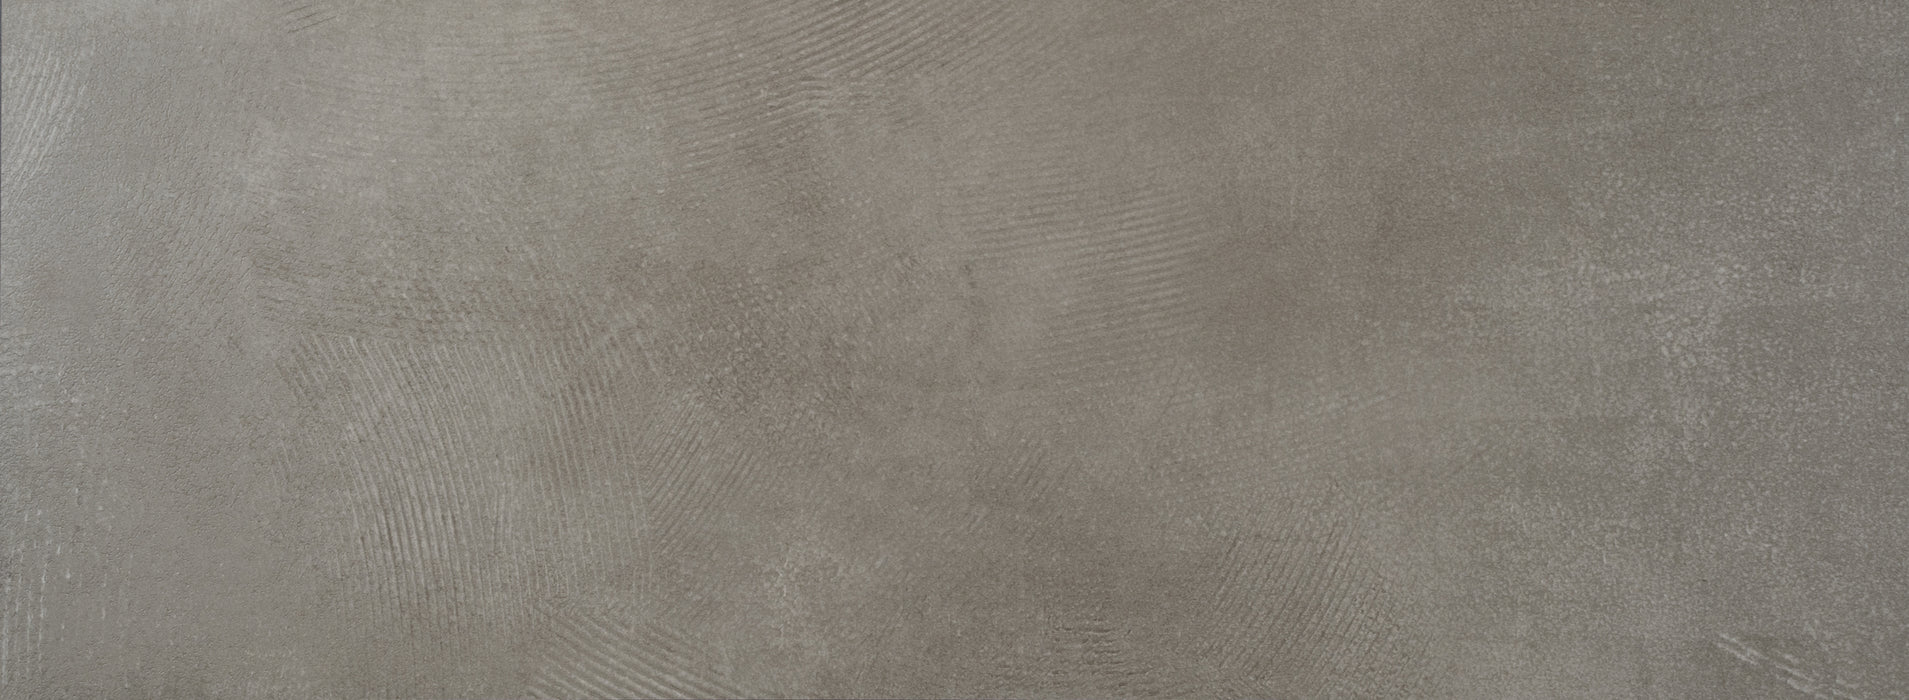 ELEMENTS TAUPE 33X90 PORCELAIN SPANISH WALL & FLOOR TILES